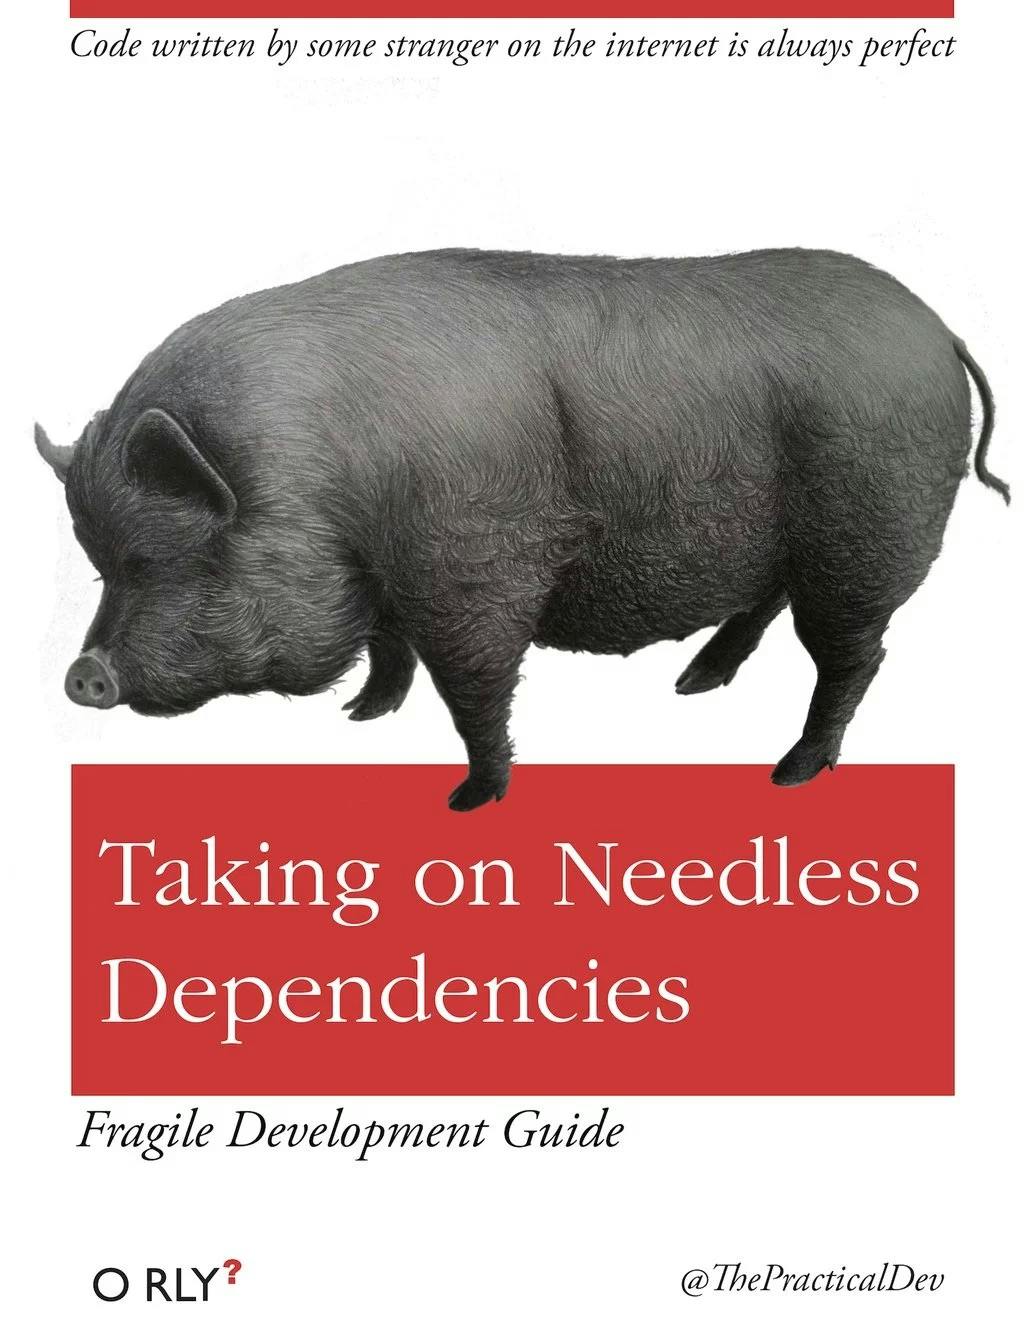 Taking on Needless Dependencies | Code written by some stranger on the internet is always perfect